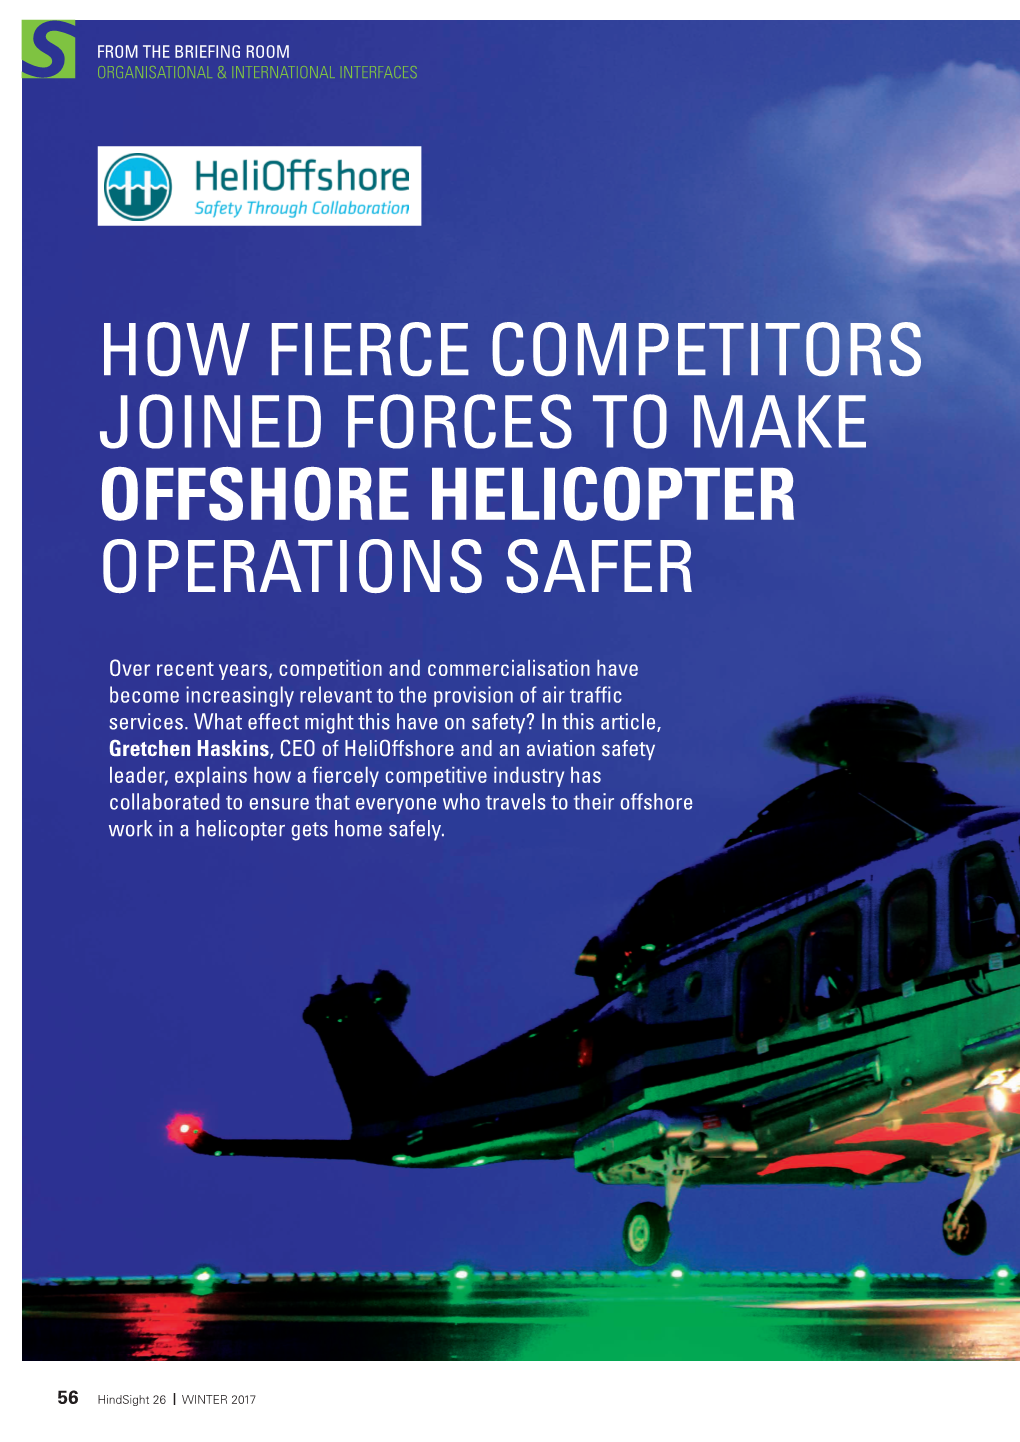 Offshore Helicopter Operations Safer